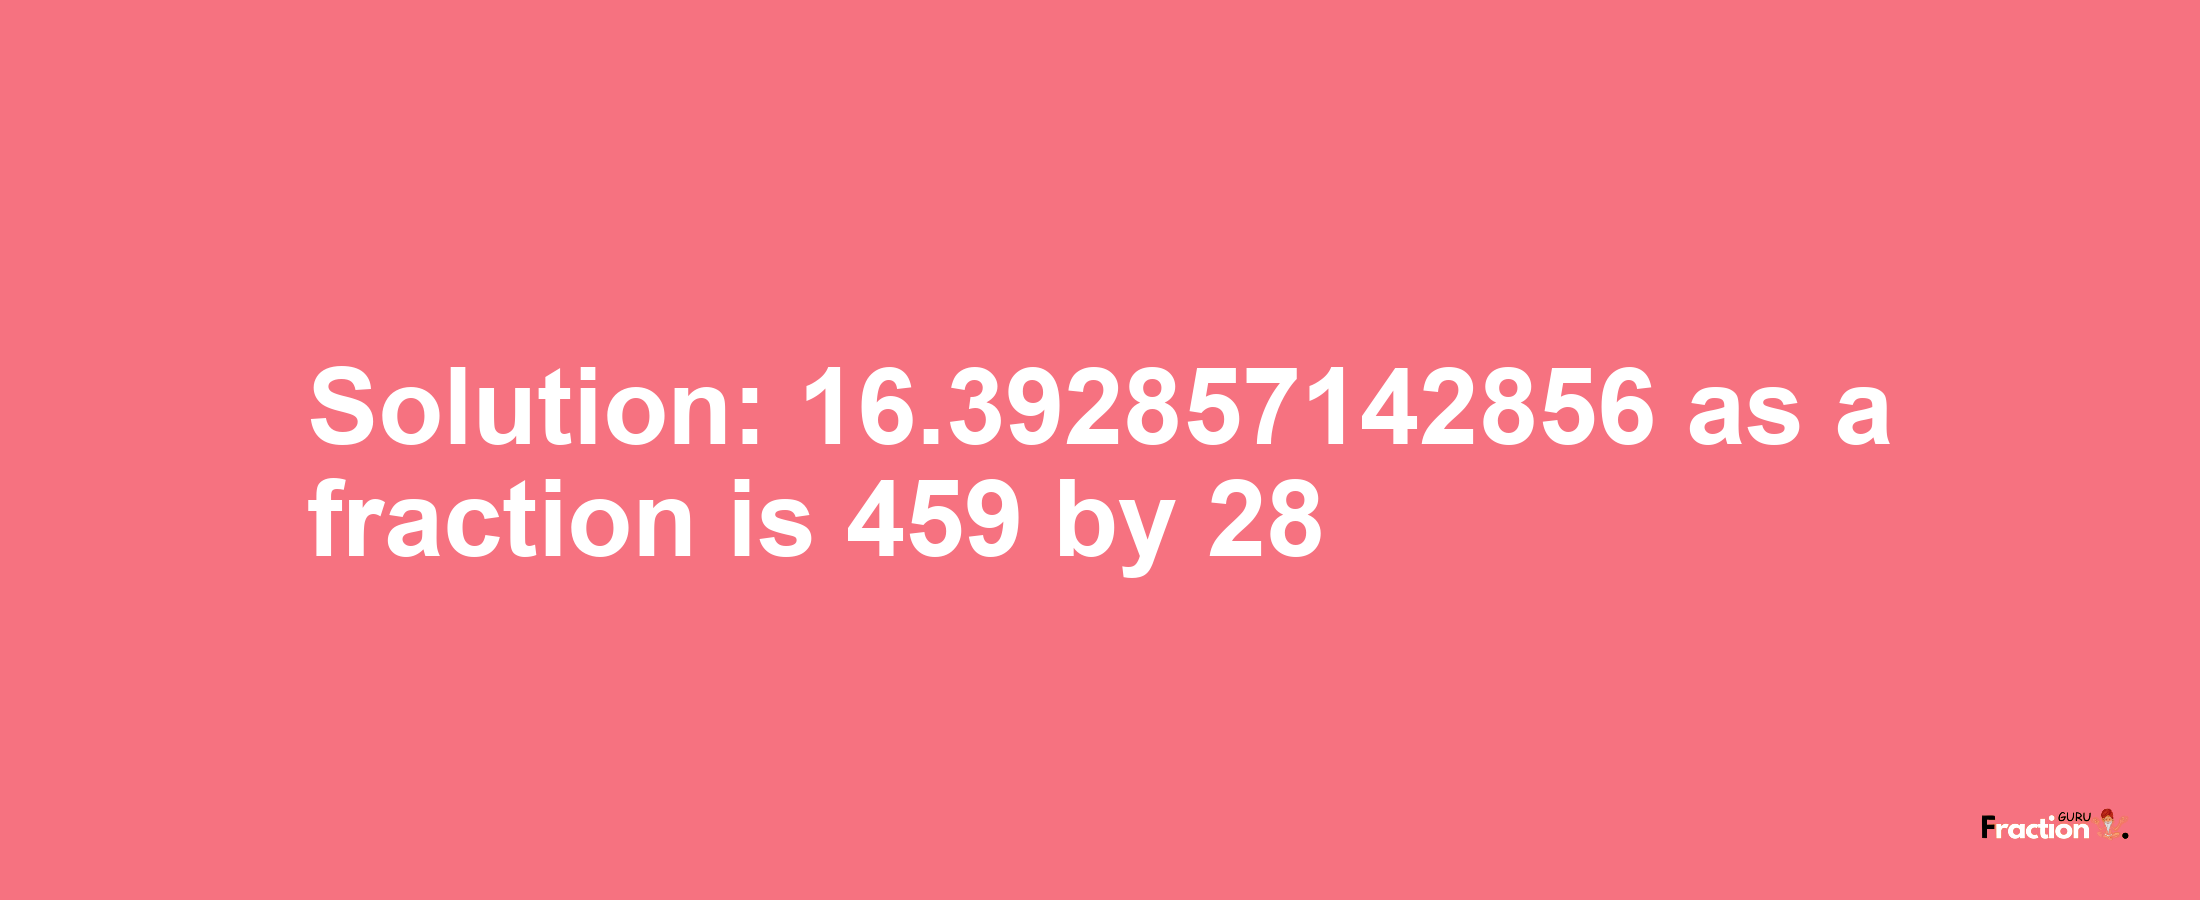 Solution:16.392857142856 as a fraction is 459/28